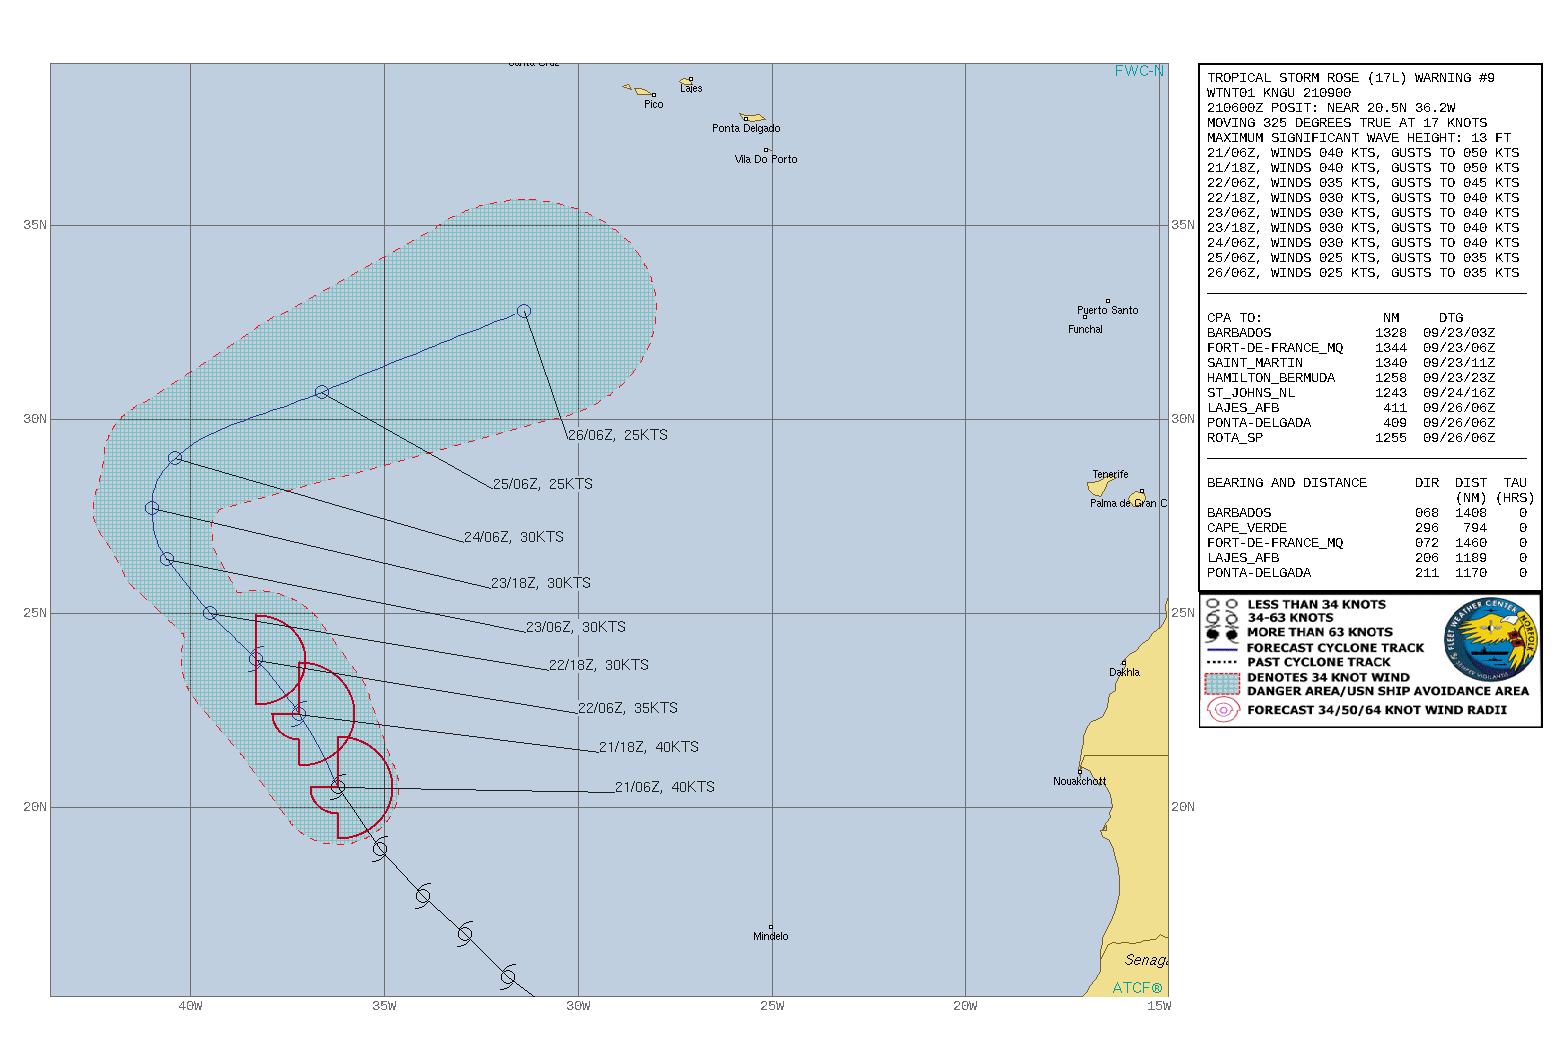 TS 17L(ROSE). WARNING 9 ISSUED AT 21/09UTC. CURRENT INTENSITY IS 40KNOTS AND IS FORECAST TO FALL BELOW 35KNOTS BY 22/18UTC.